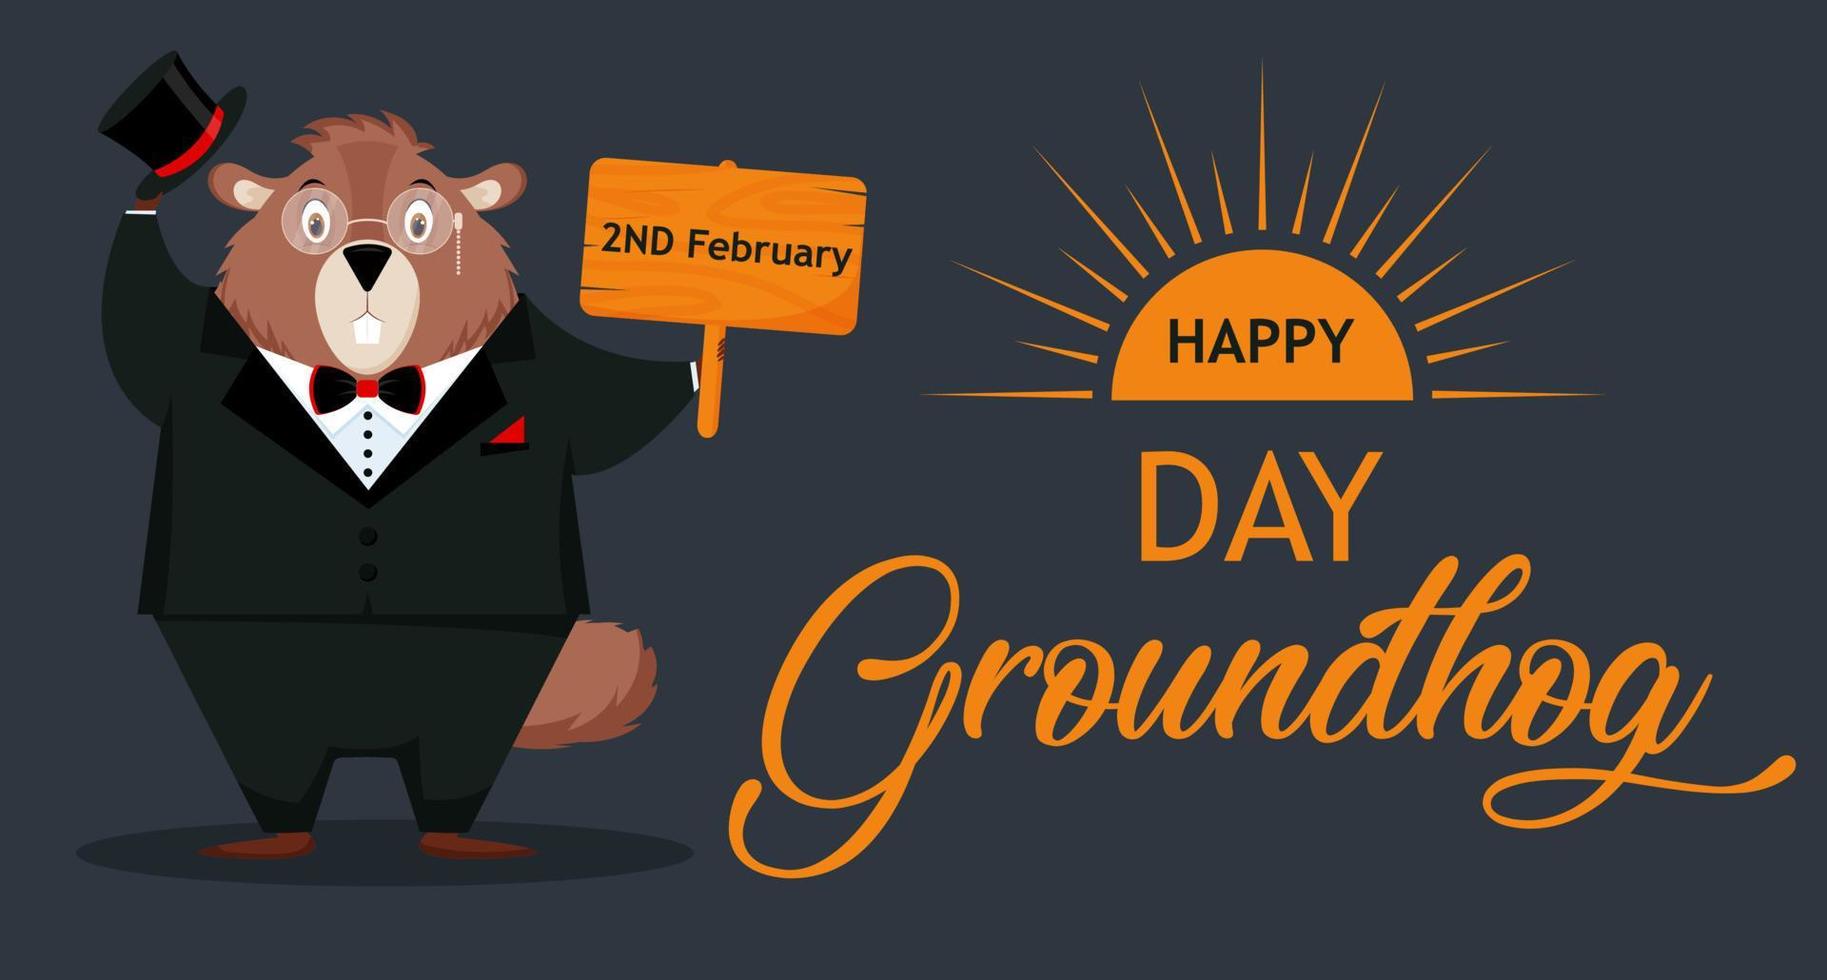 Happy Groundhog Day. Banner with the image of a funny elegant groundhog in a suit. Vector illustration isolated on a dark background.